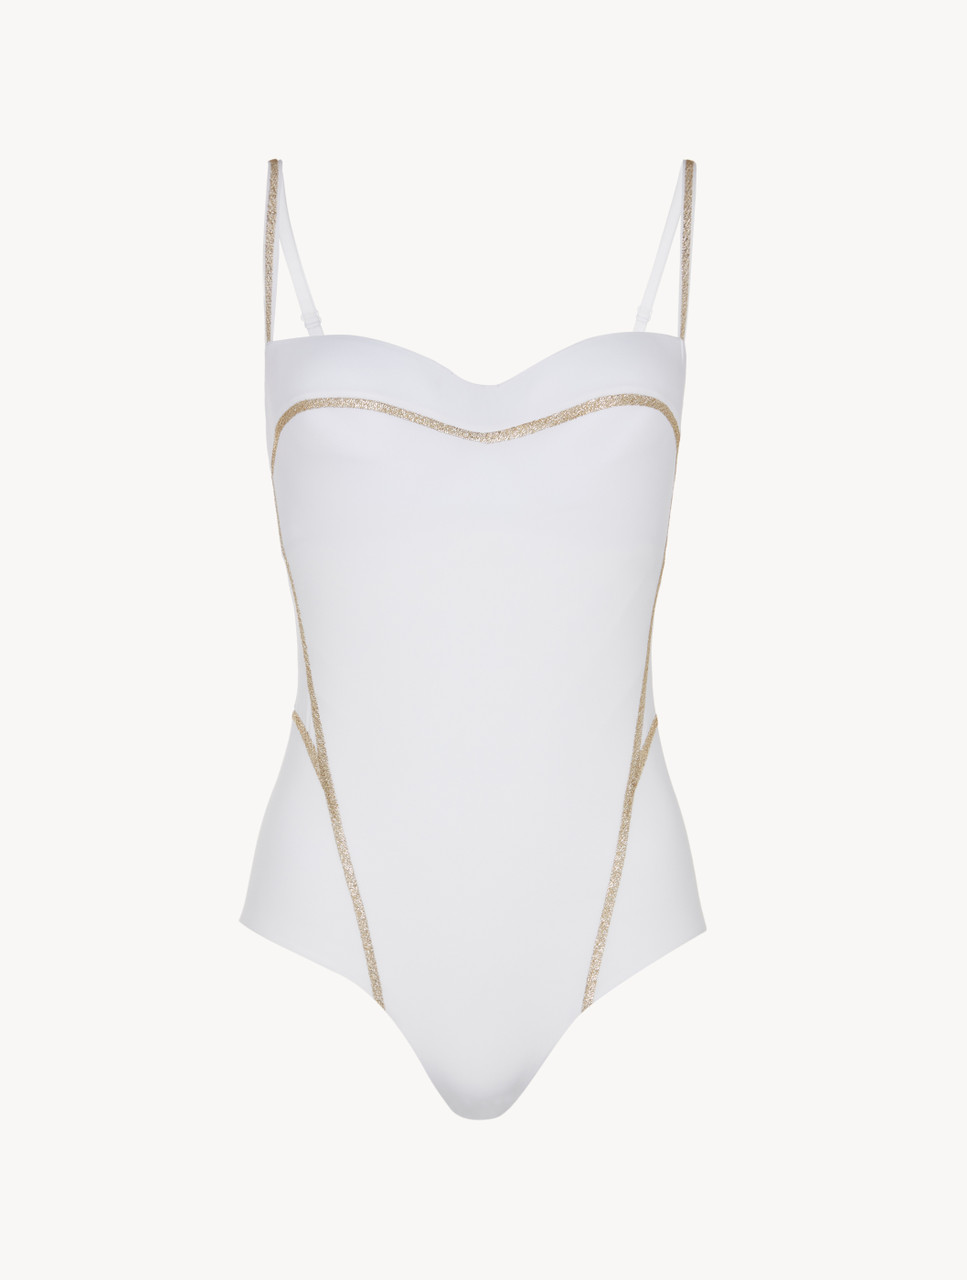 Underwired white swimsuit with metallic embroidery